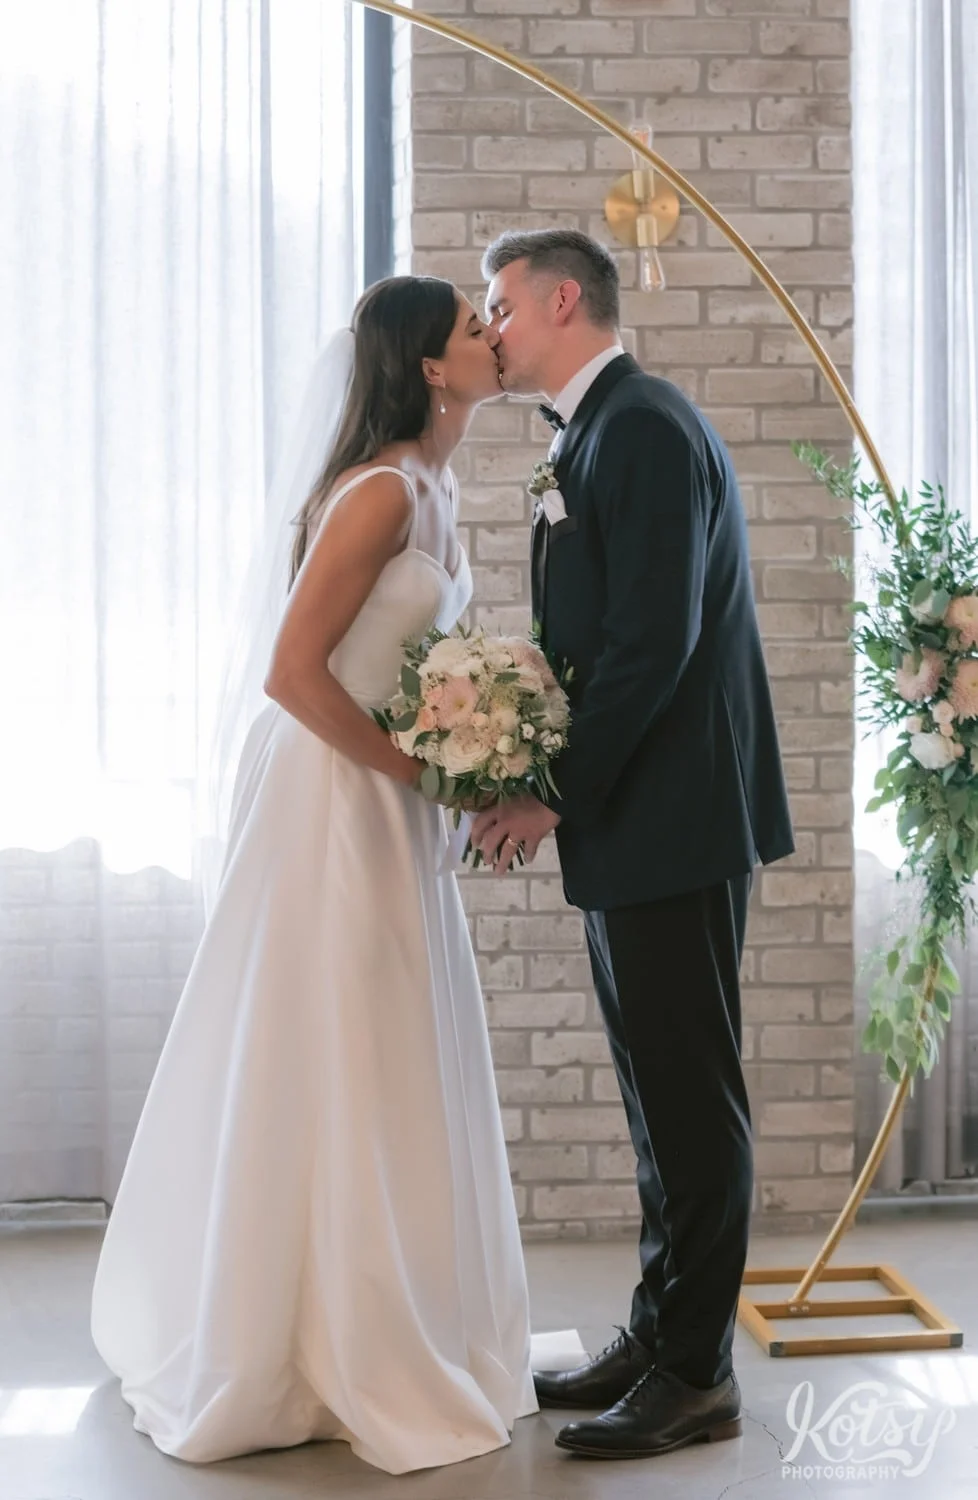 A full body shot of a bride and groom enjoying their first kiss during a Village Loft wedding ceremony in Toronto, Canada